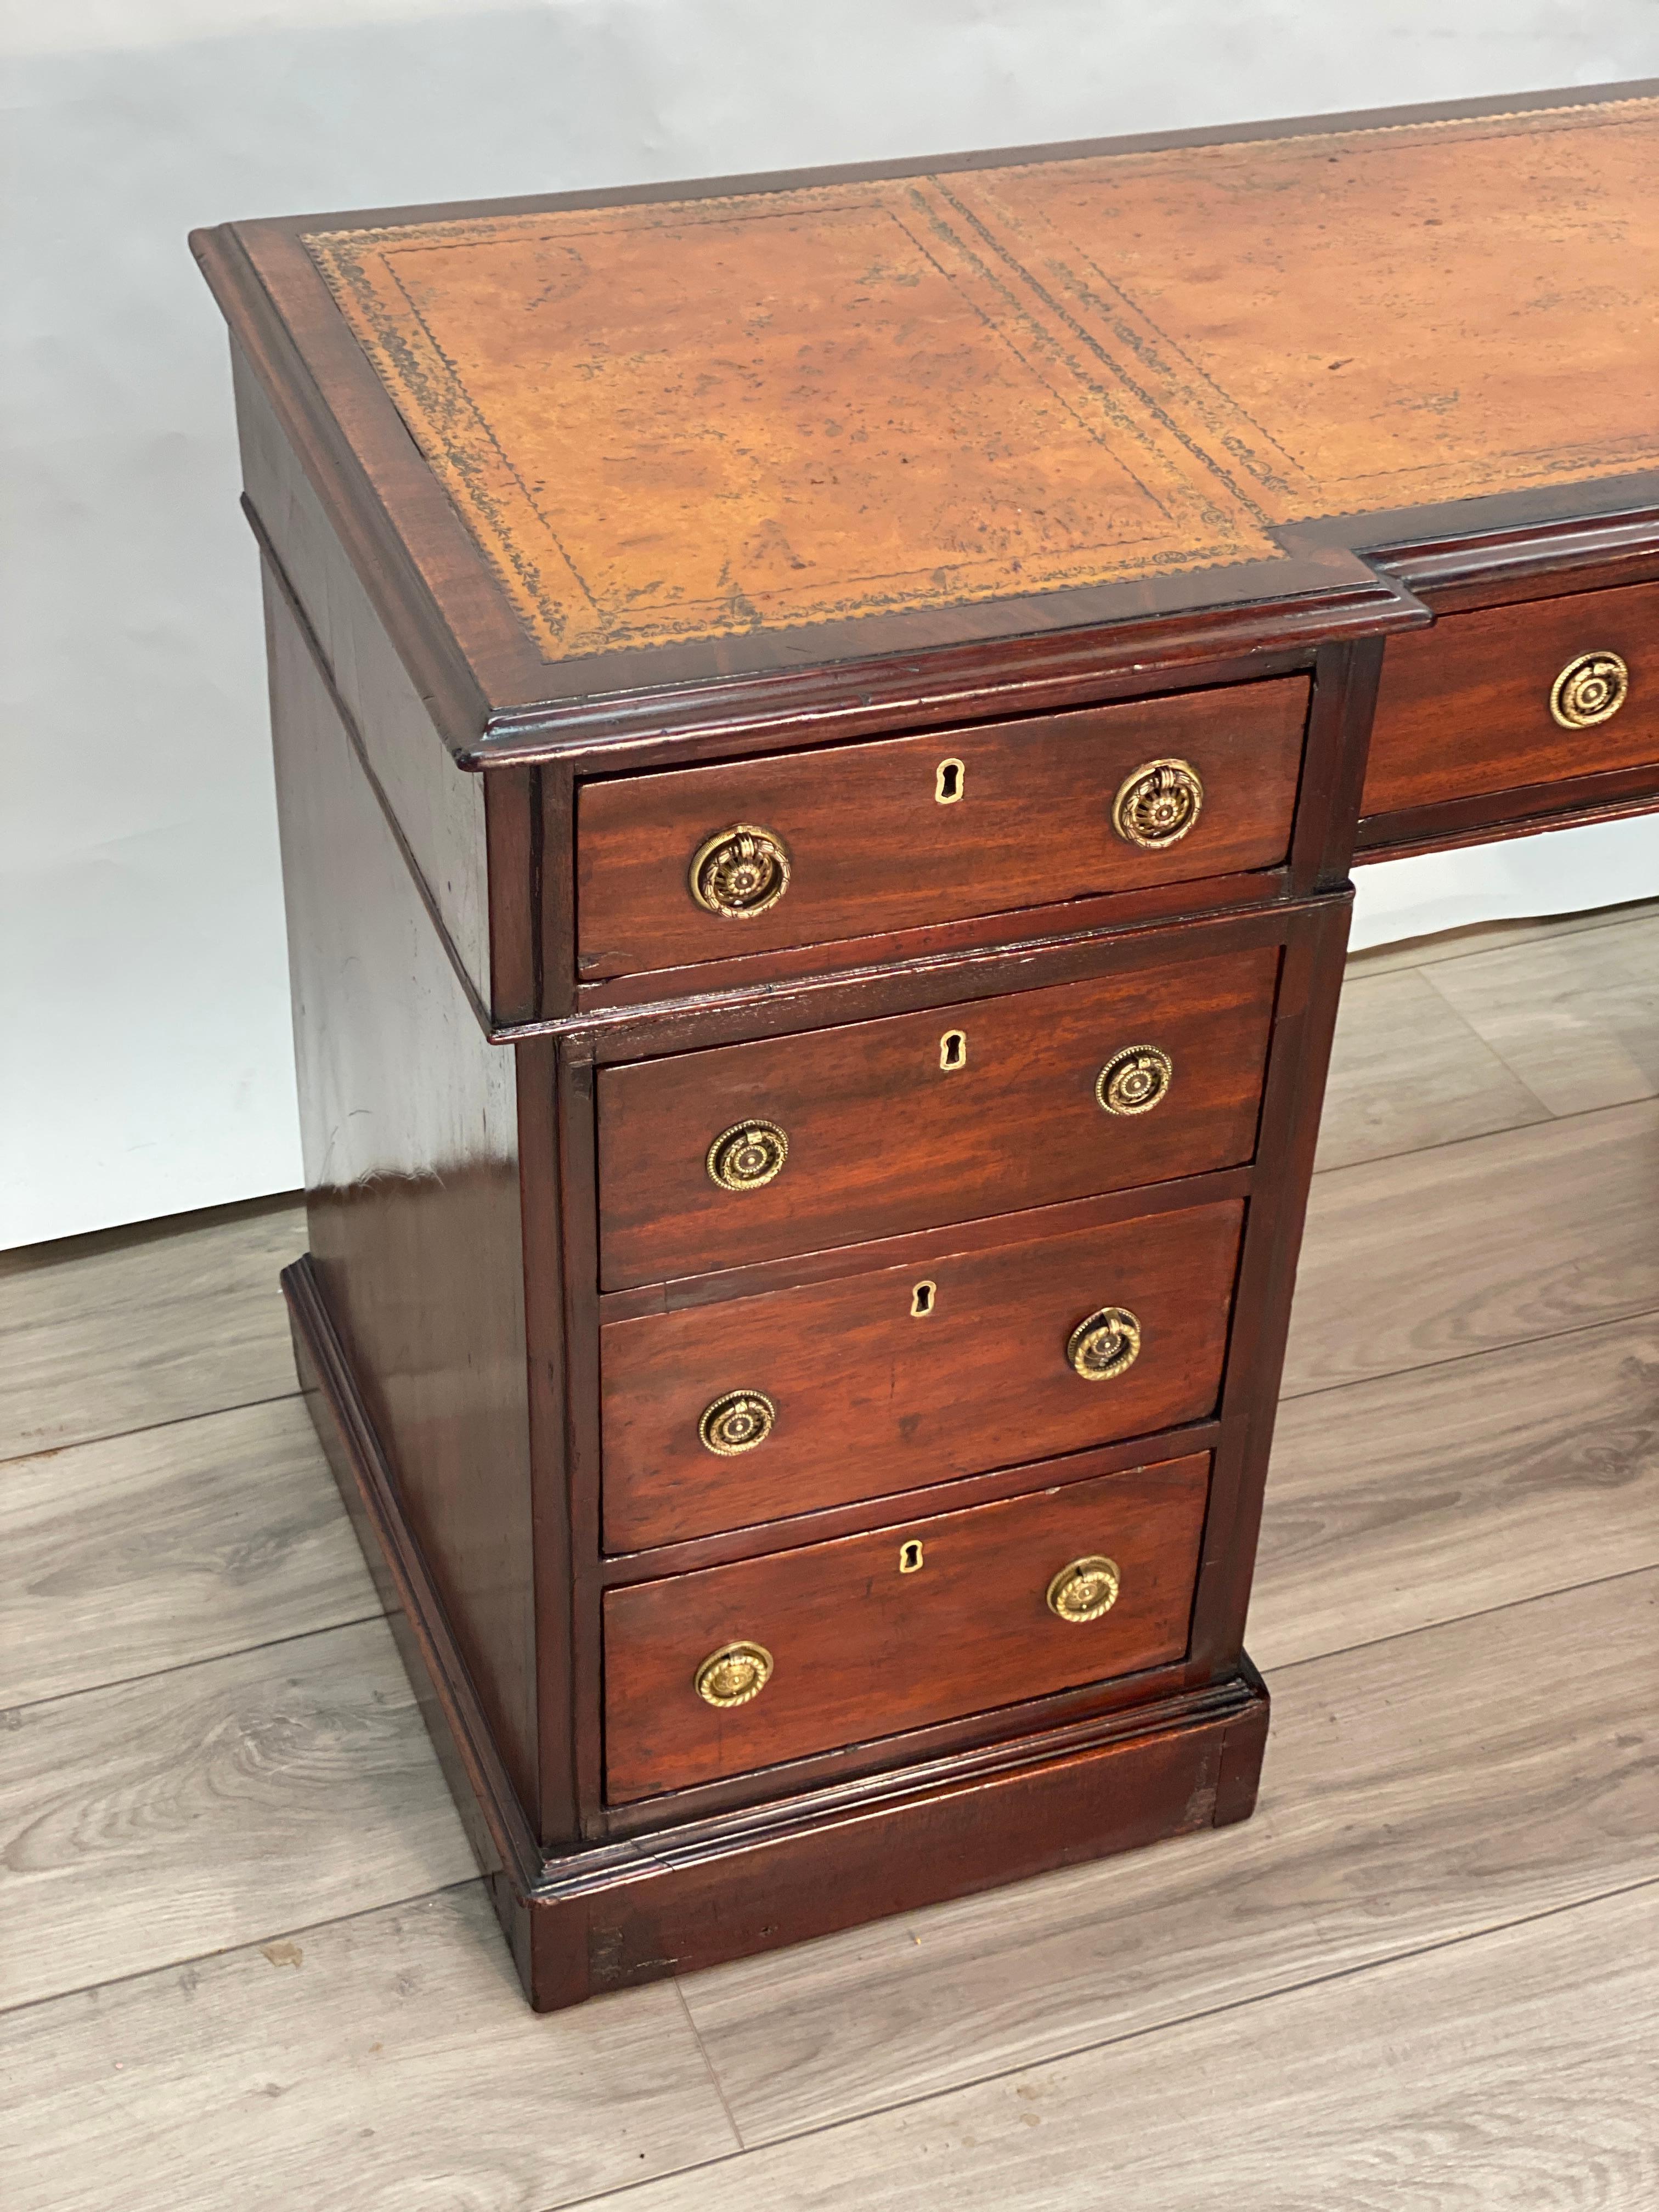 This is a handsome mid 19th century English knee hole pedestal desk. There are three sections to the desk. The side cabinets are mahogany and pine woods, each fitted with three graduated drawers and brass ring pulls. The top section is fitted with